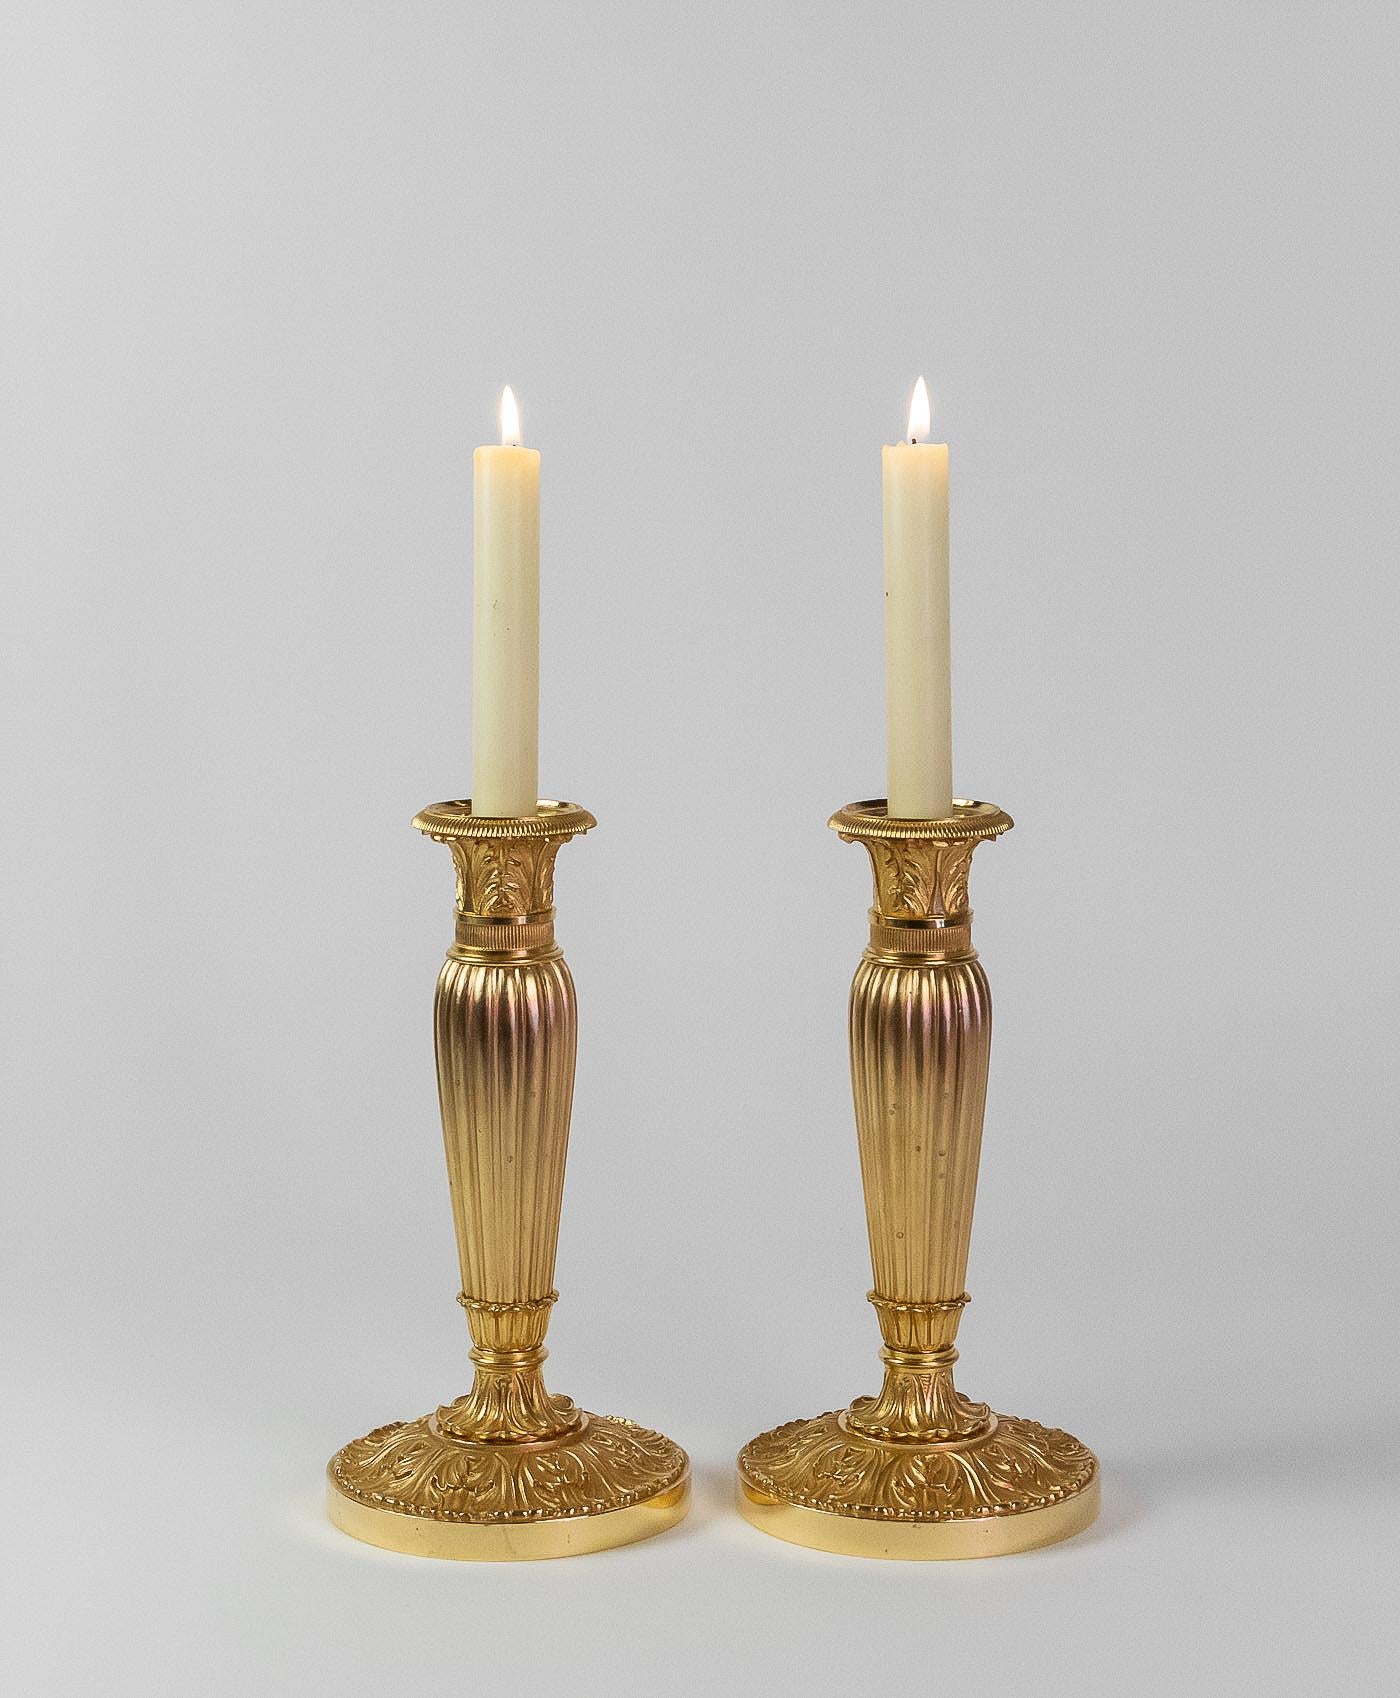 French Empire Period, pair of chiseled gilt-bronze candlesticks, circa 1805-1810.

An elegant pair of gilt-bronze candlesticks. Our candlesticks present a beautiful finely chiseled work of palmettes on the base.

Lovely French Empire period